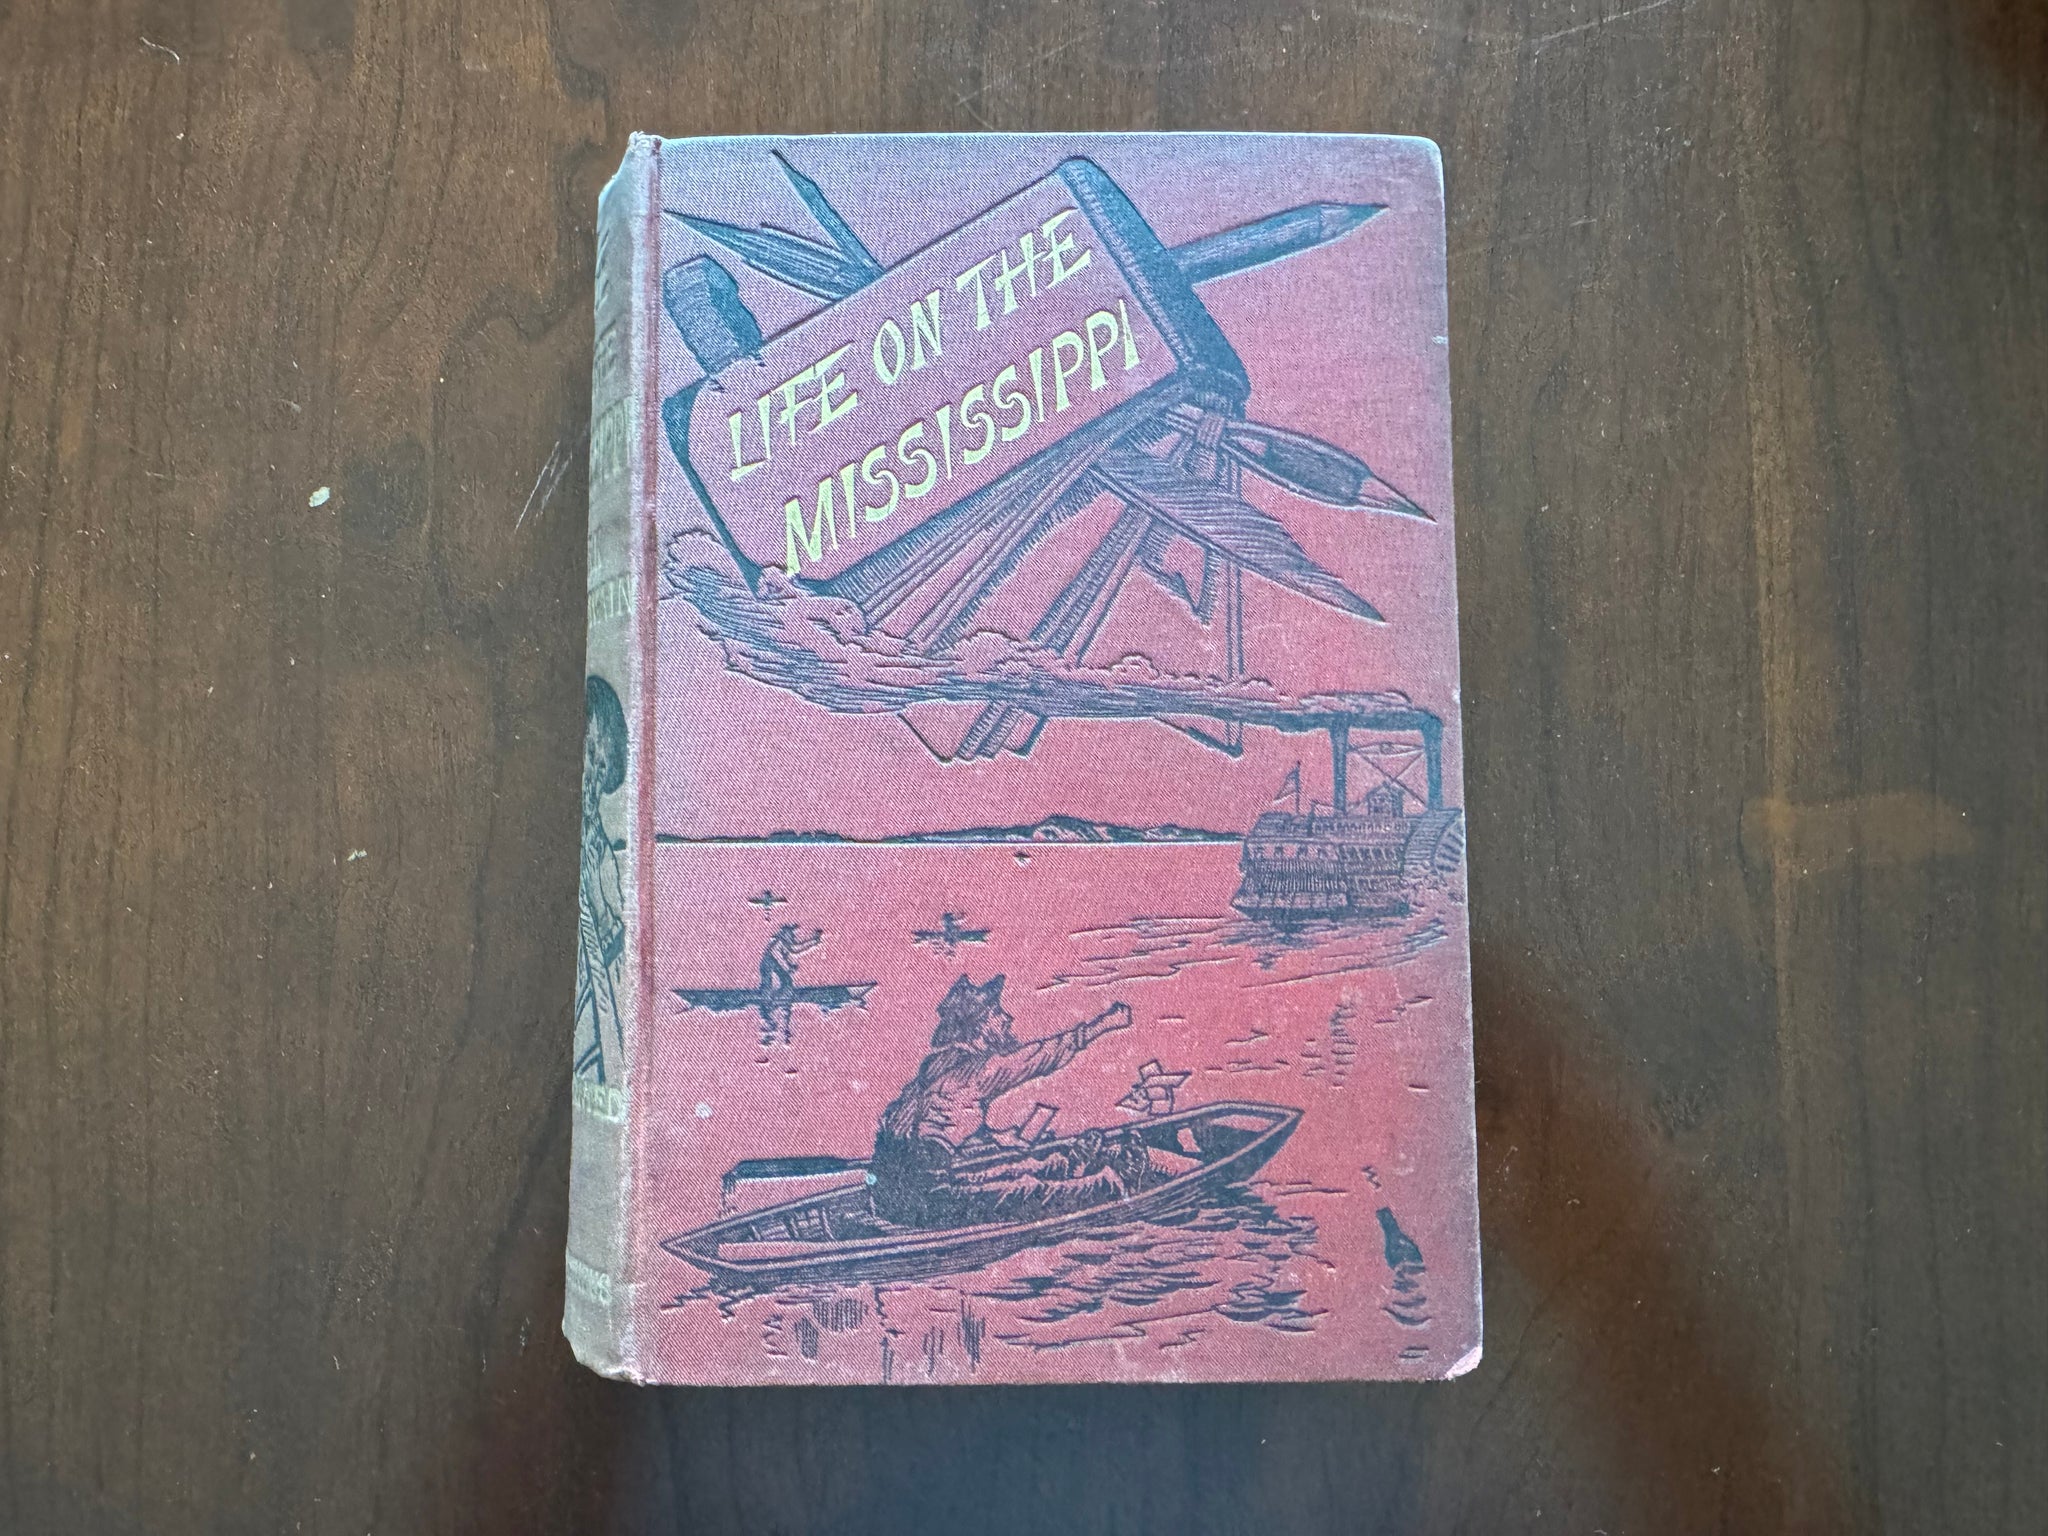 Life on the Mississippi (1883 First Edition U.K.) - Mark Twain